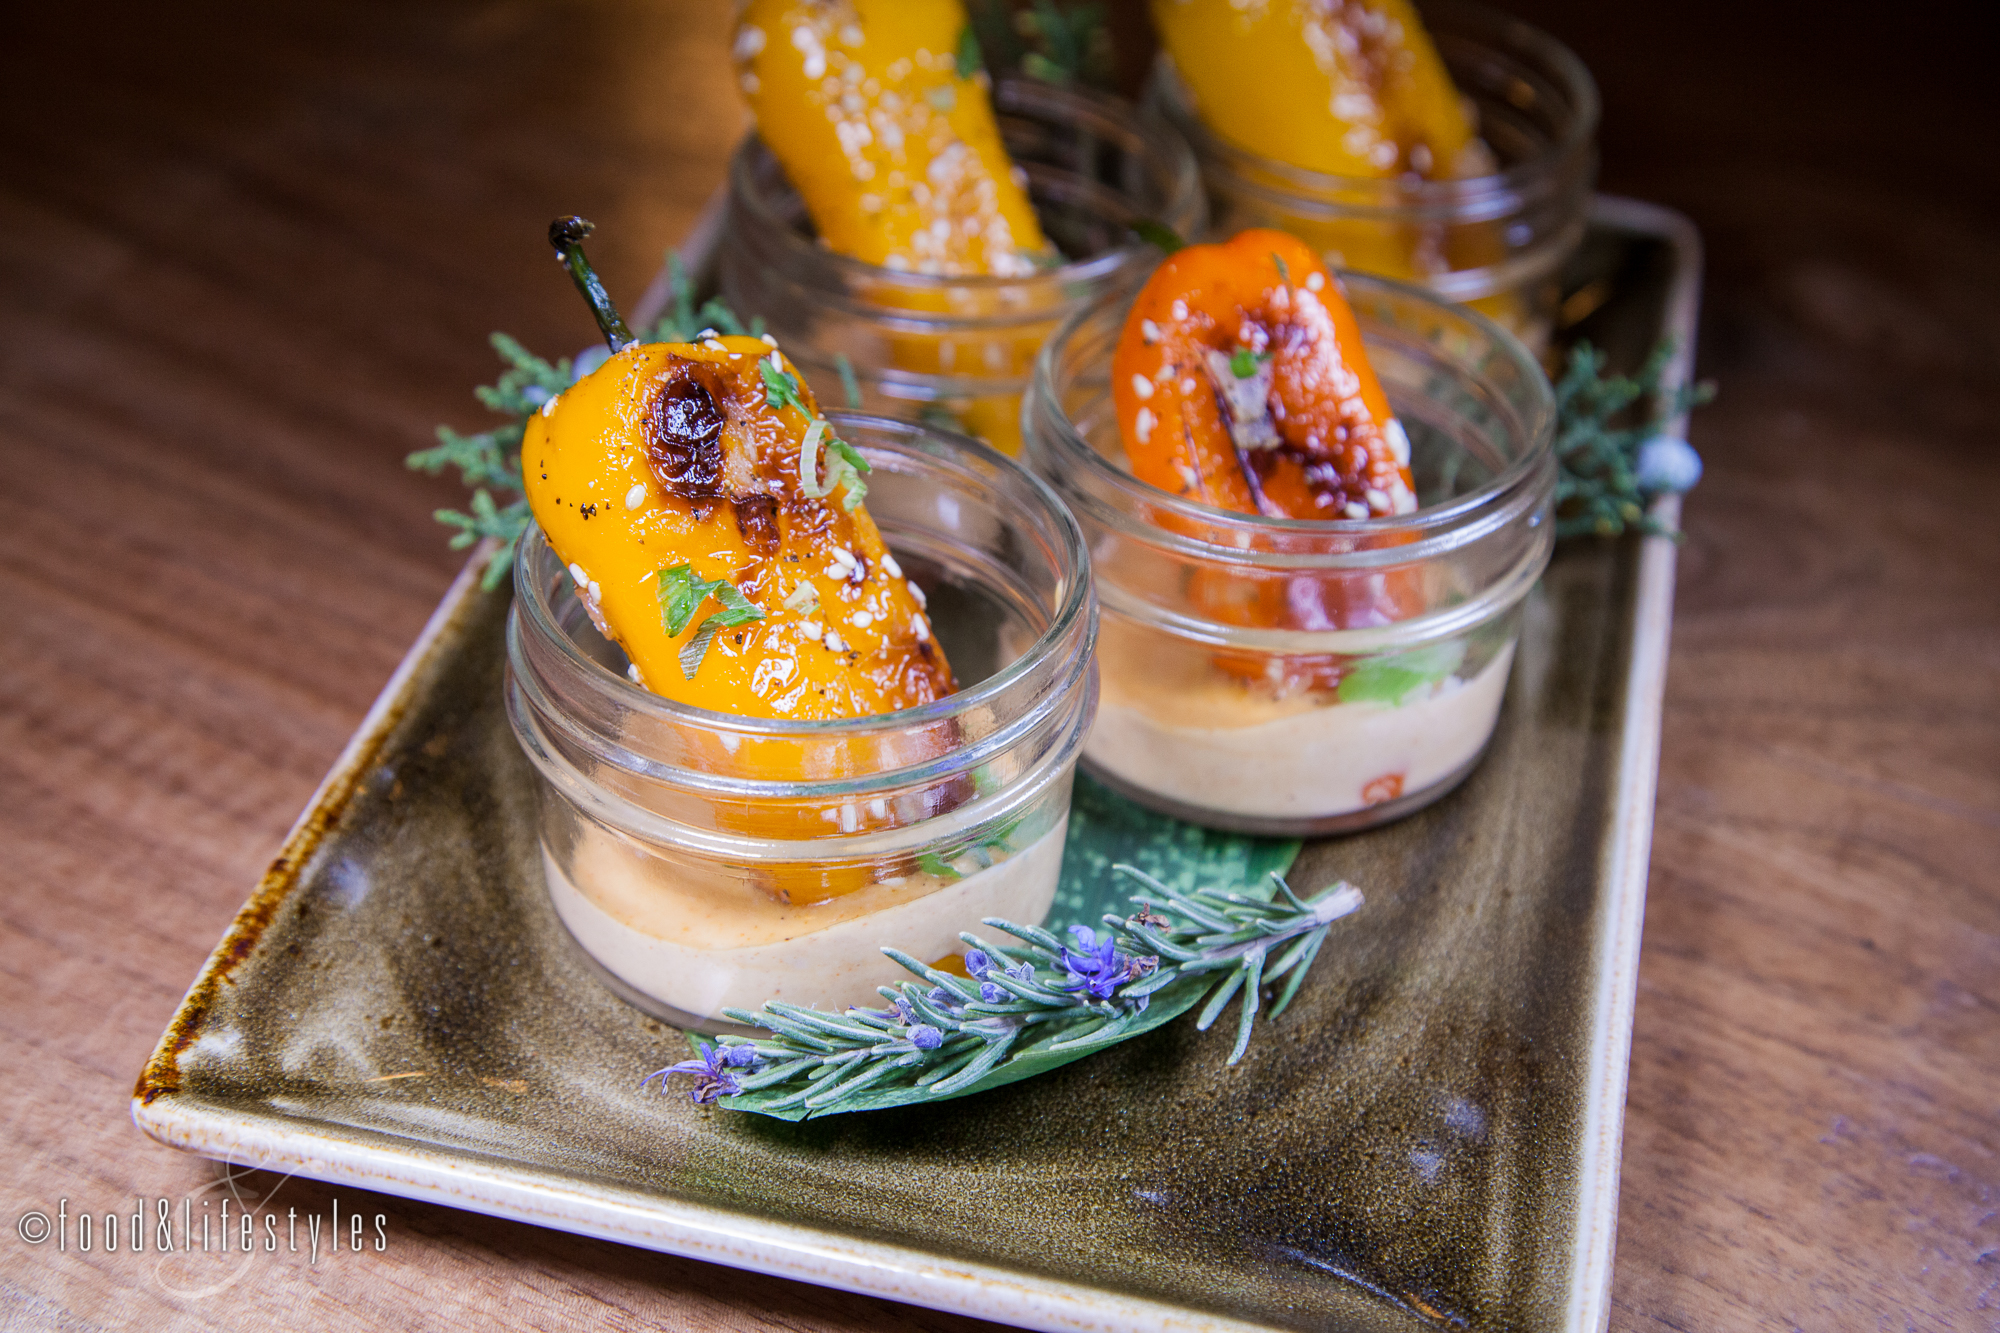 Roasted mini-bell peppers with chipotle aioli, scallion, and sesame